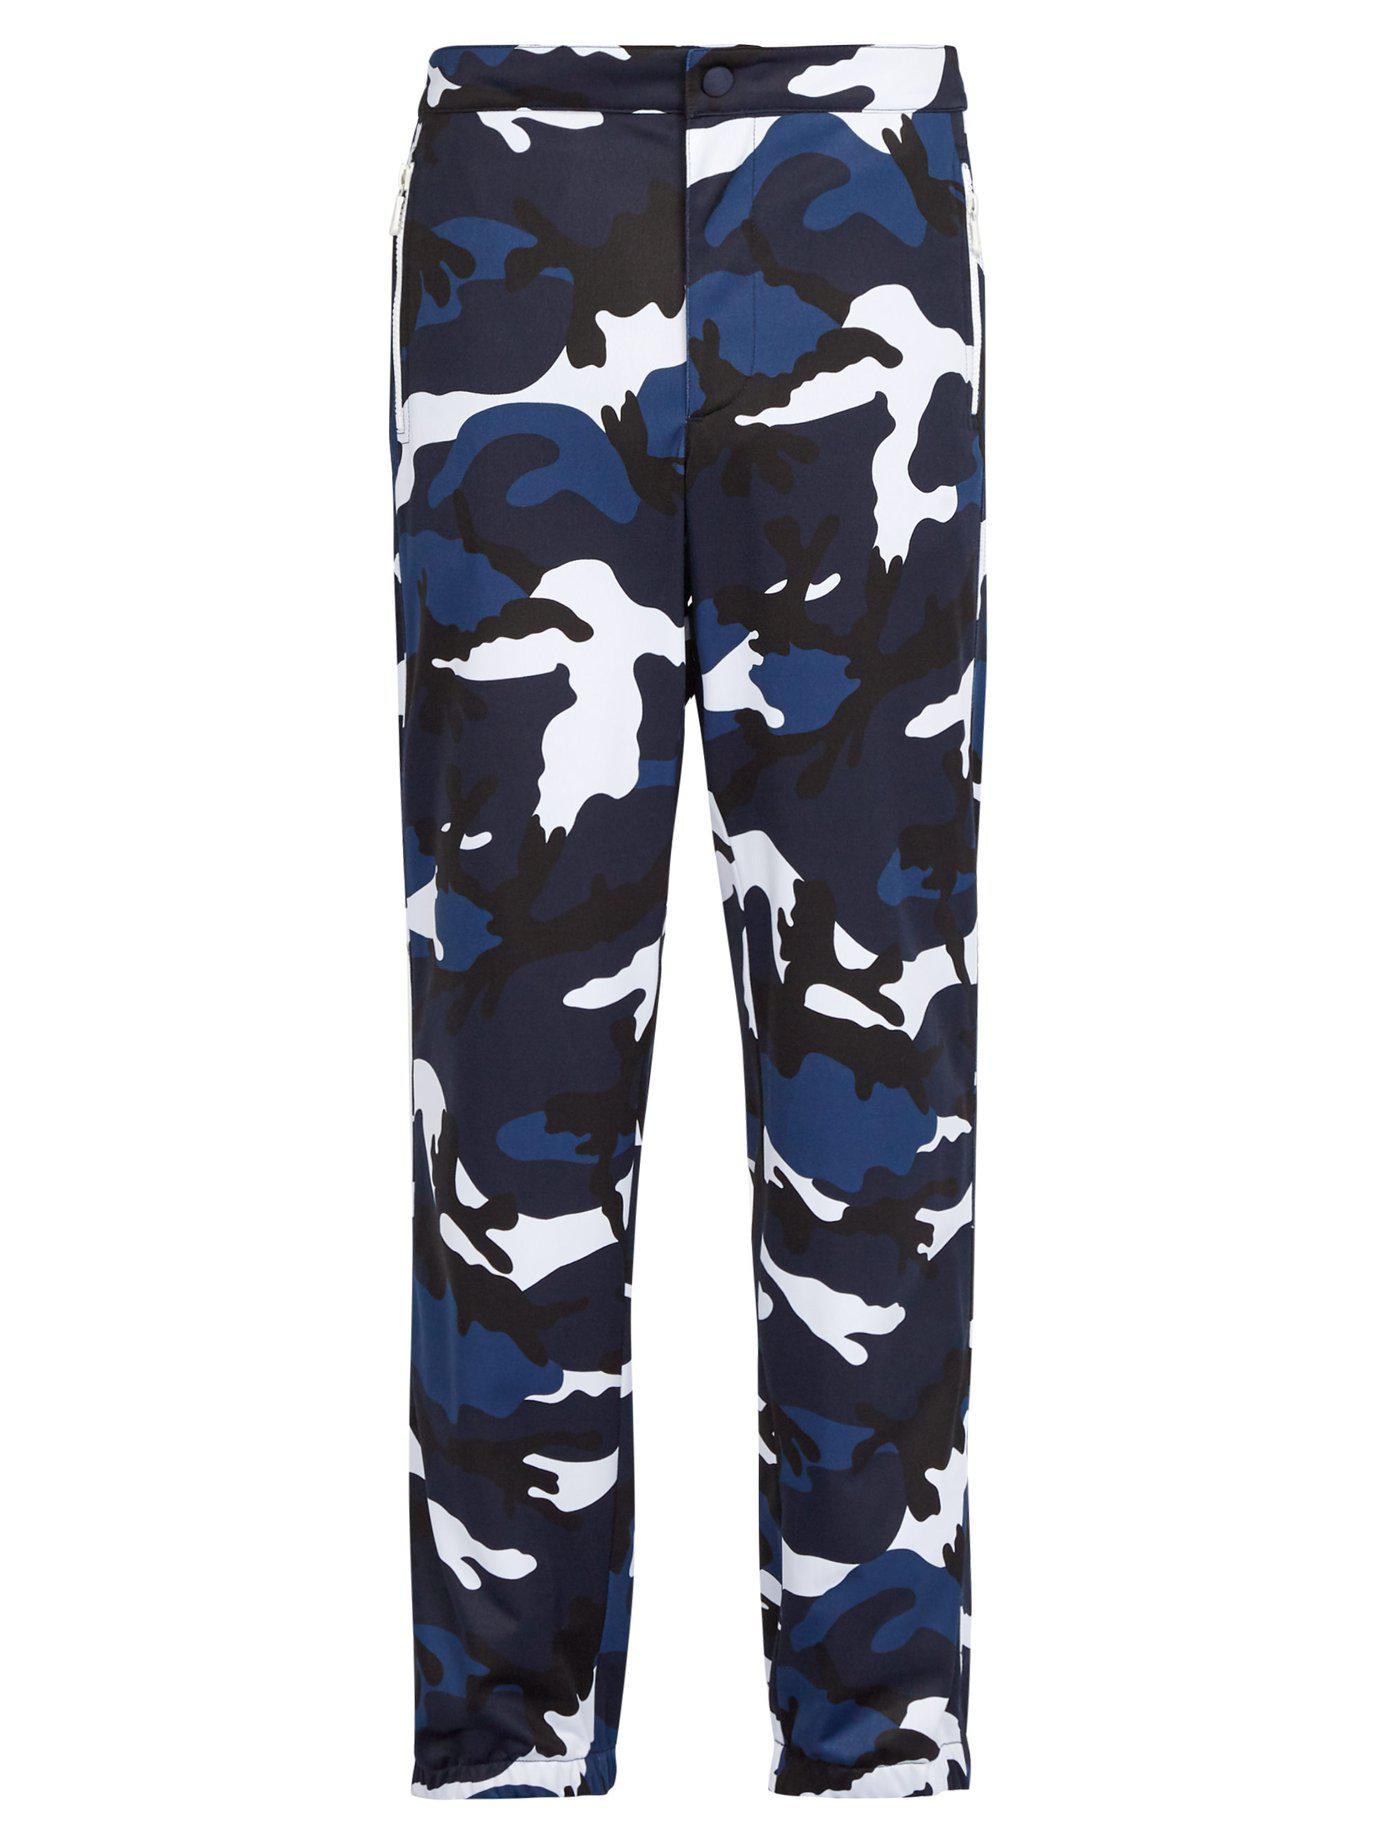 Valentino Camouflage Track Pants in Blue for Men - Lyst